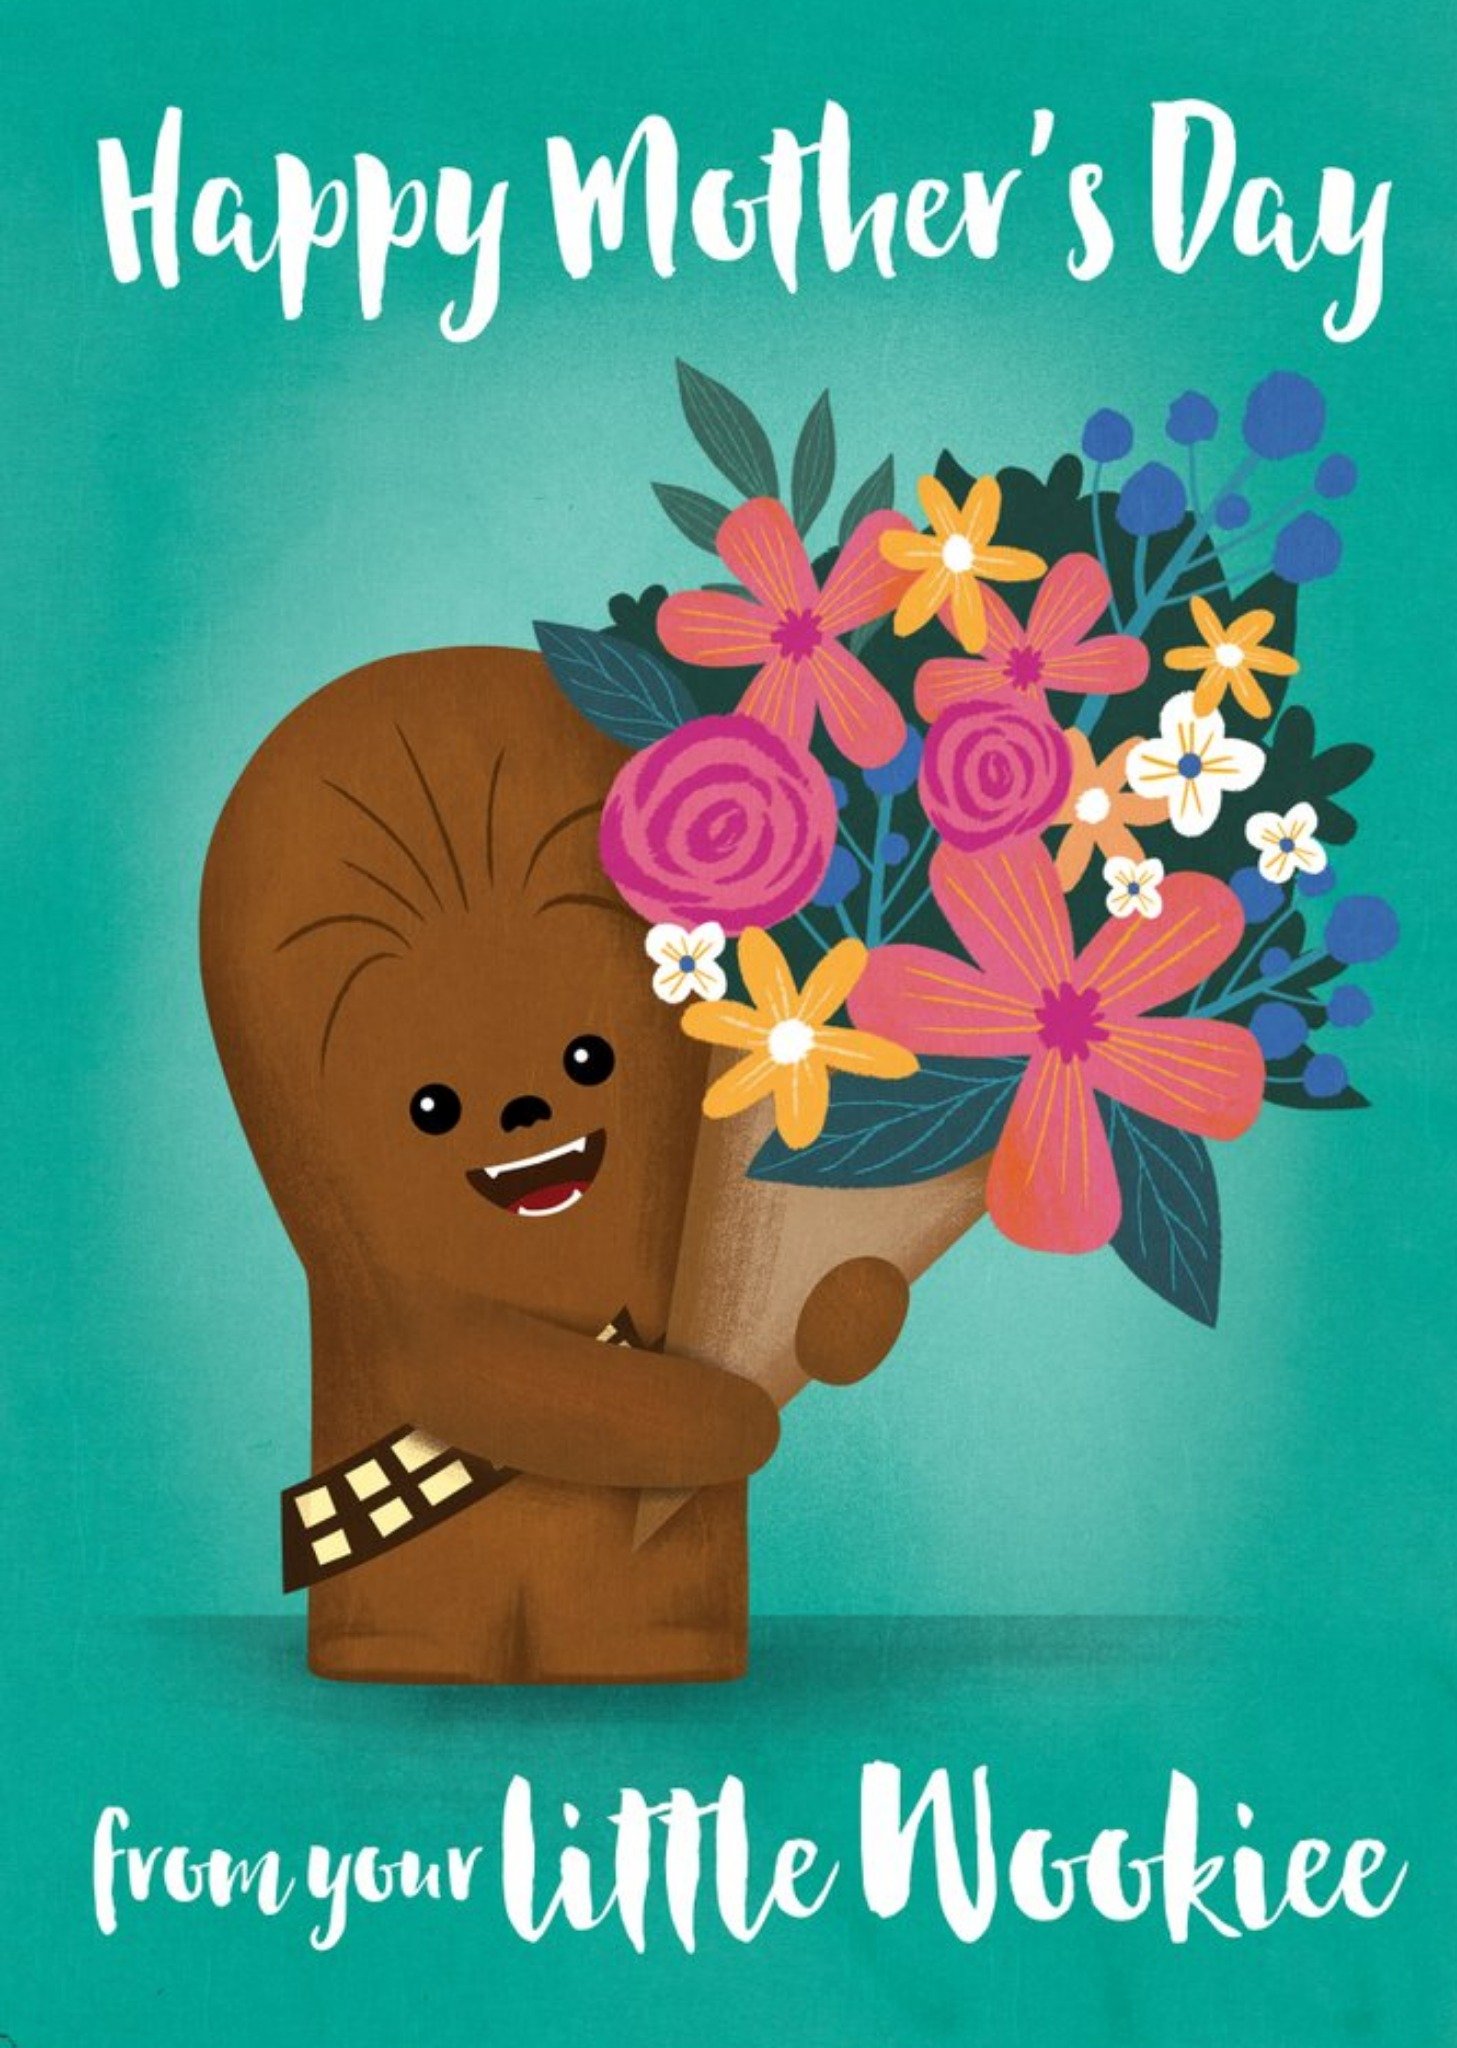 Disney Star Wars Happy Mother's Day From Your Little Wookie Card Ecard